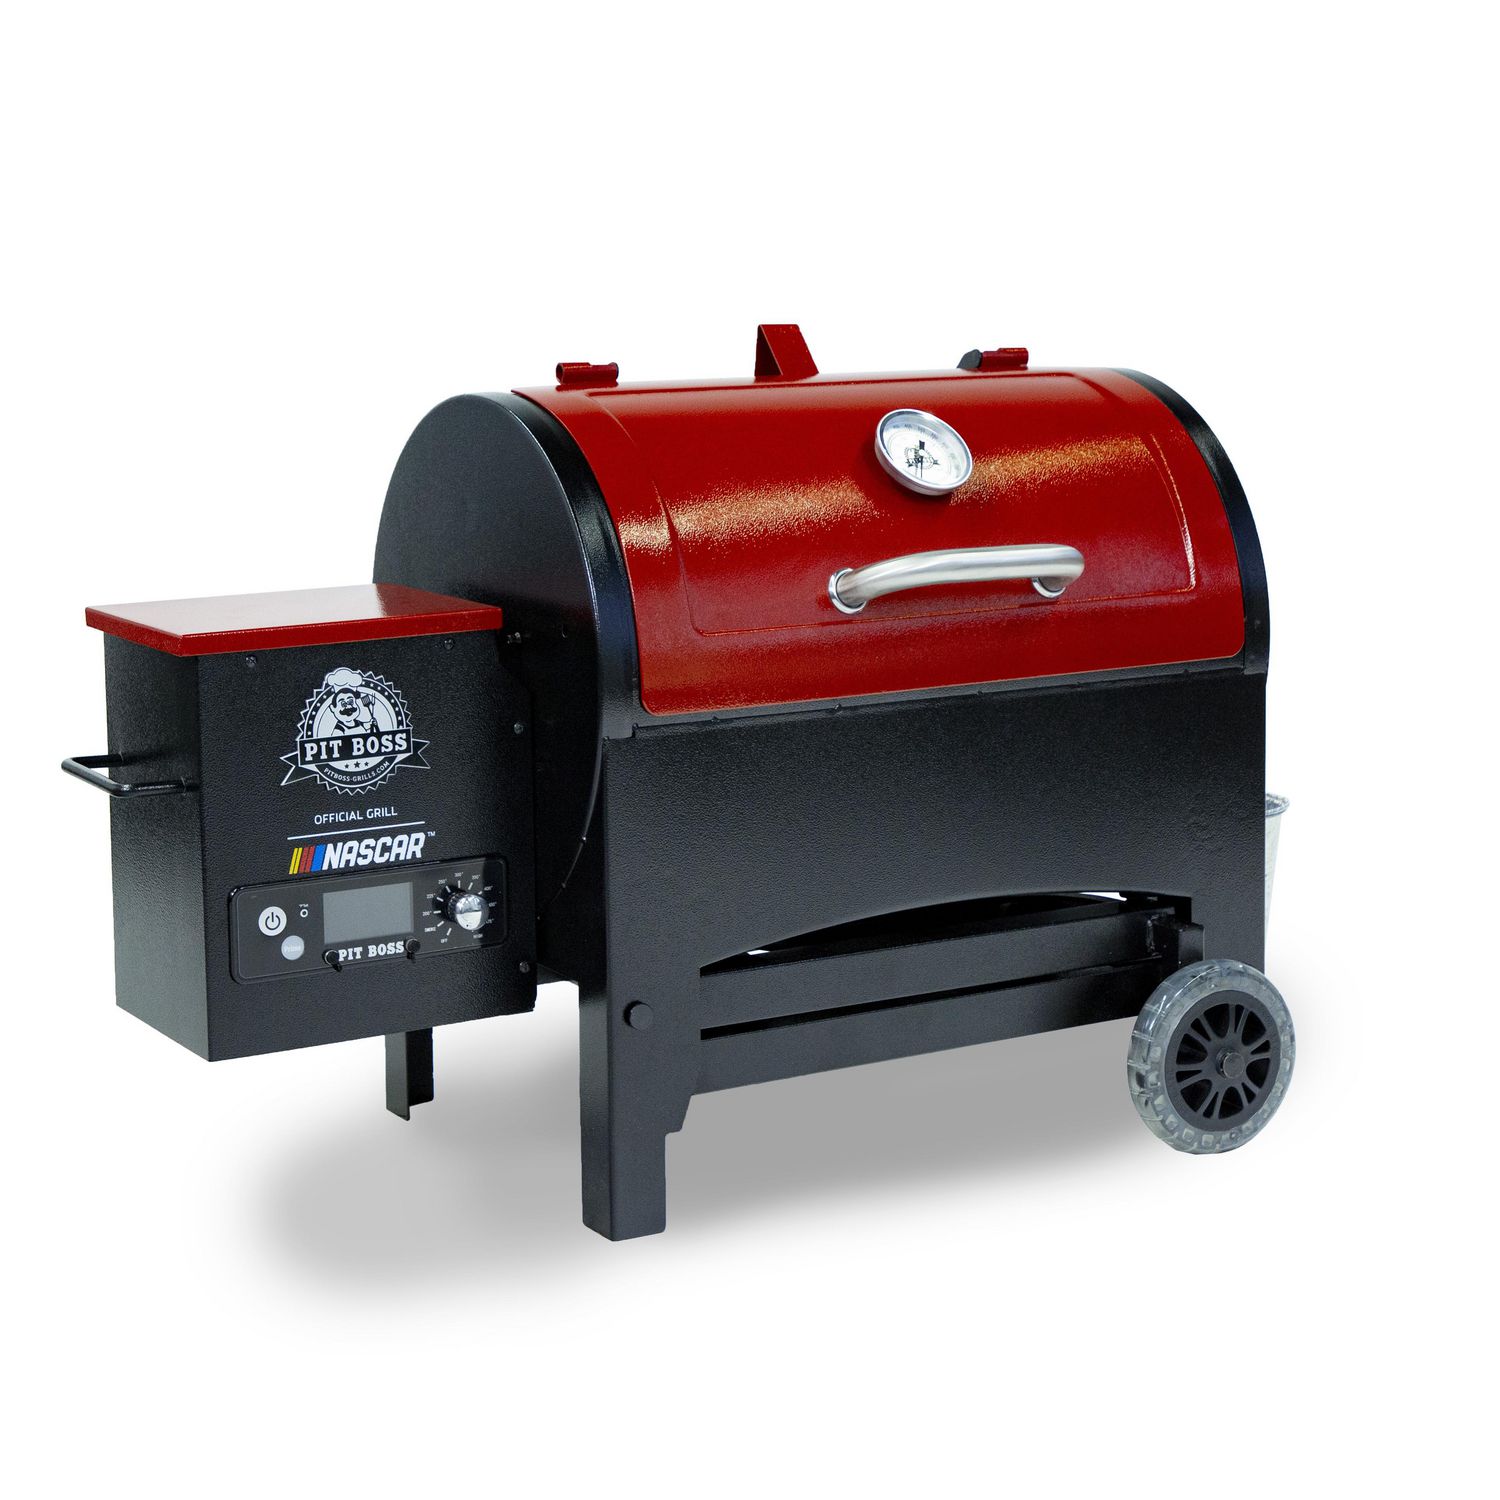 Pit Boss 440TG Wood Fired Pellet Grill 